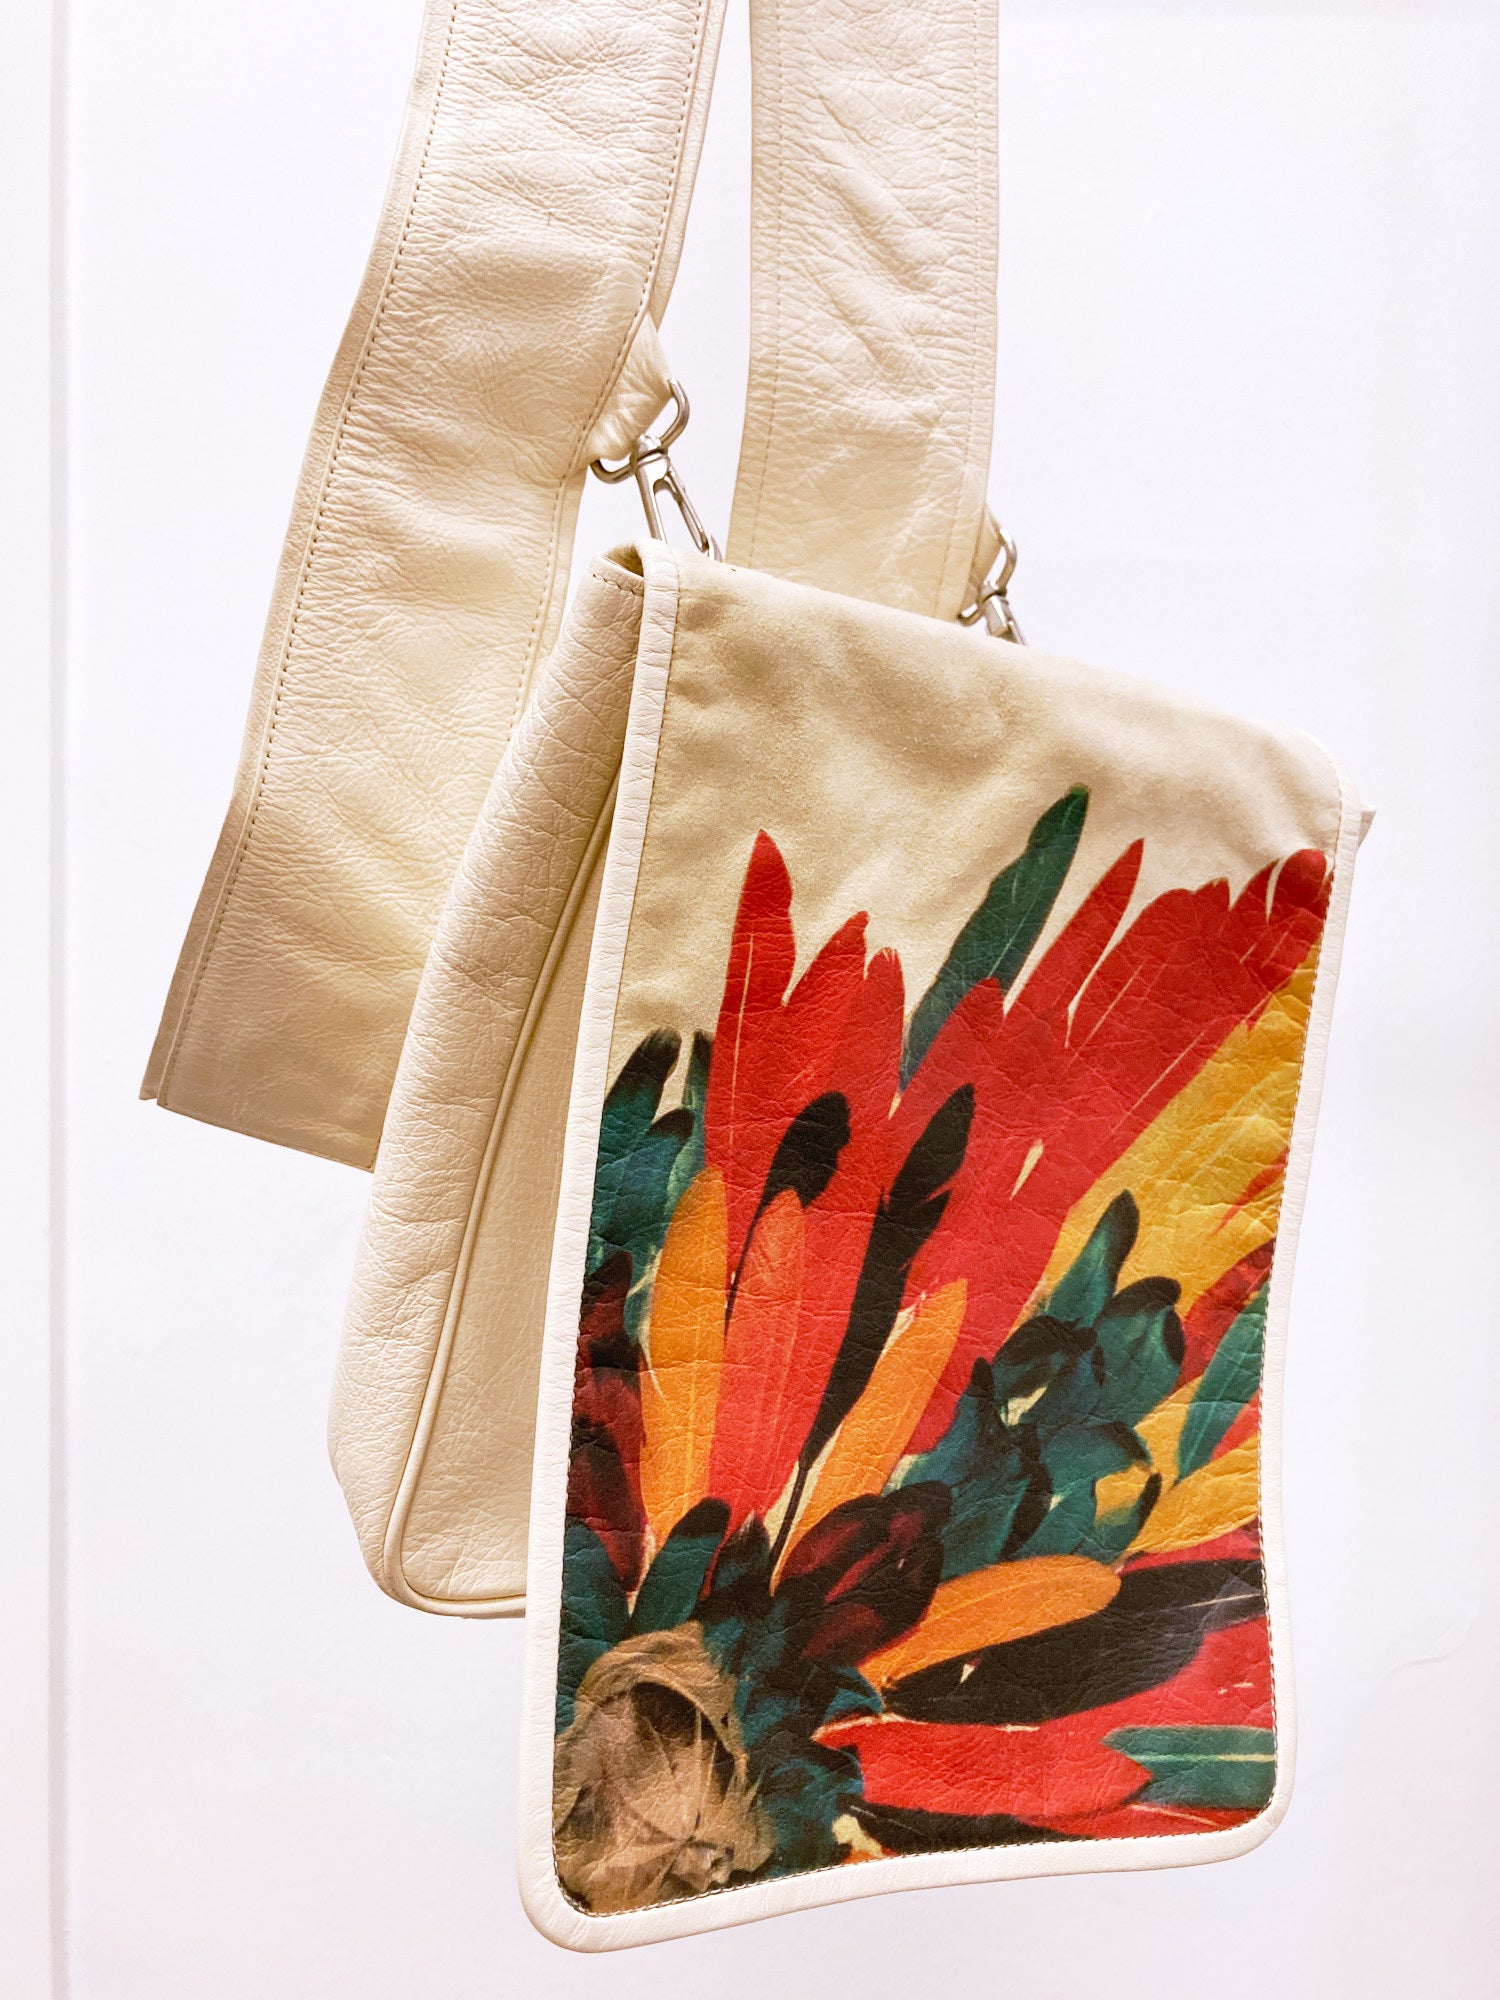 Masaki Matsushima Homme cream leather cross-body bag with feather print flap